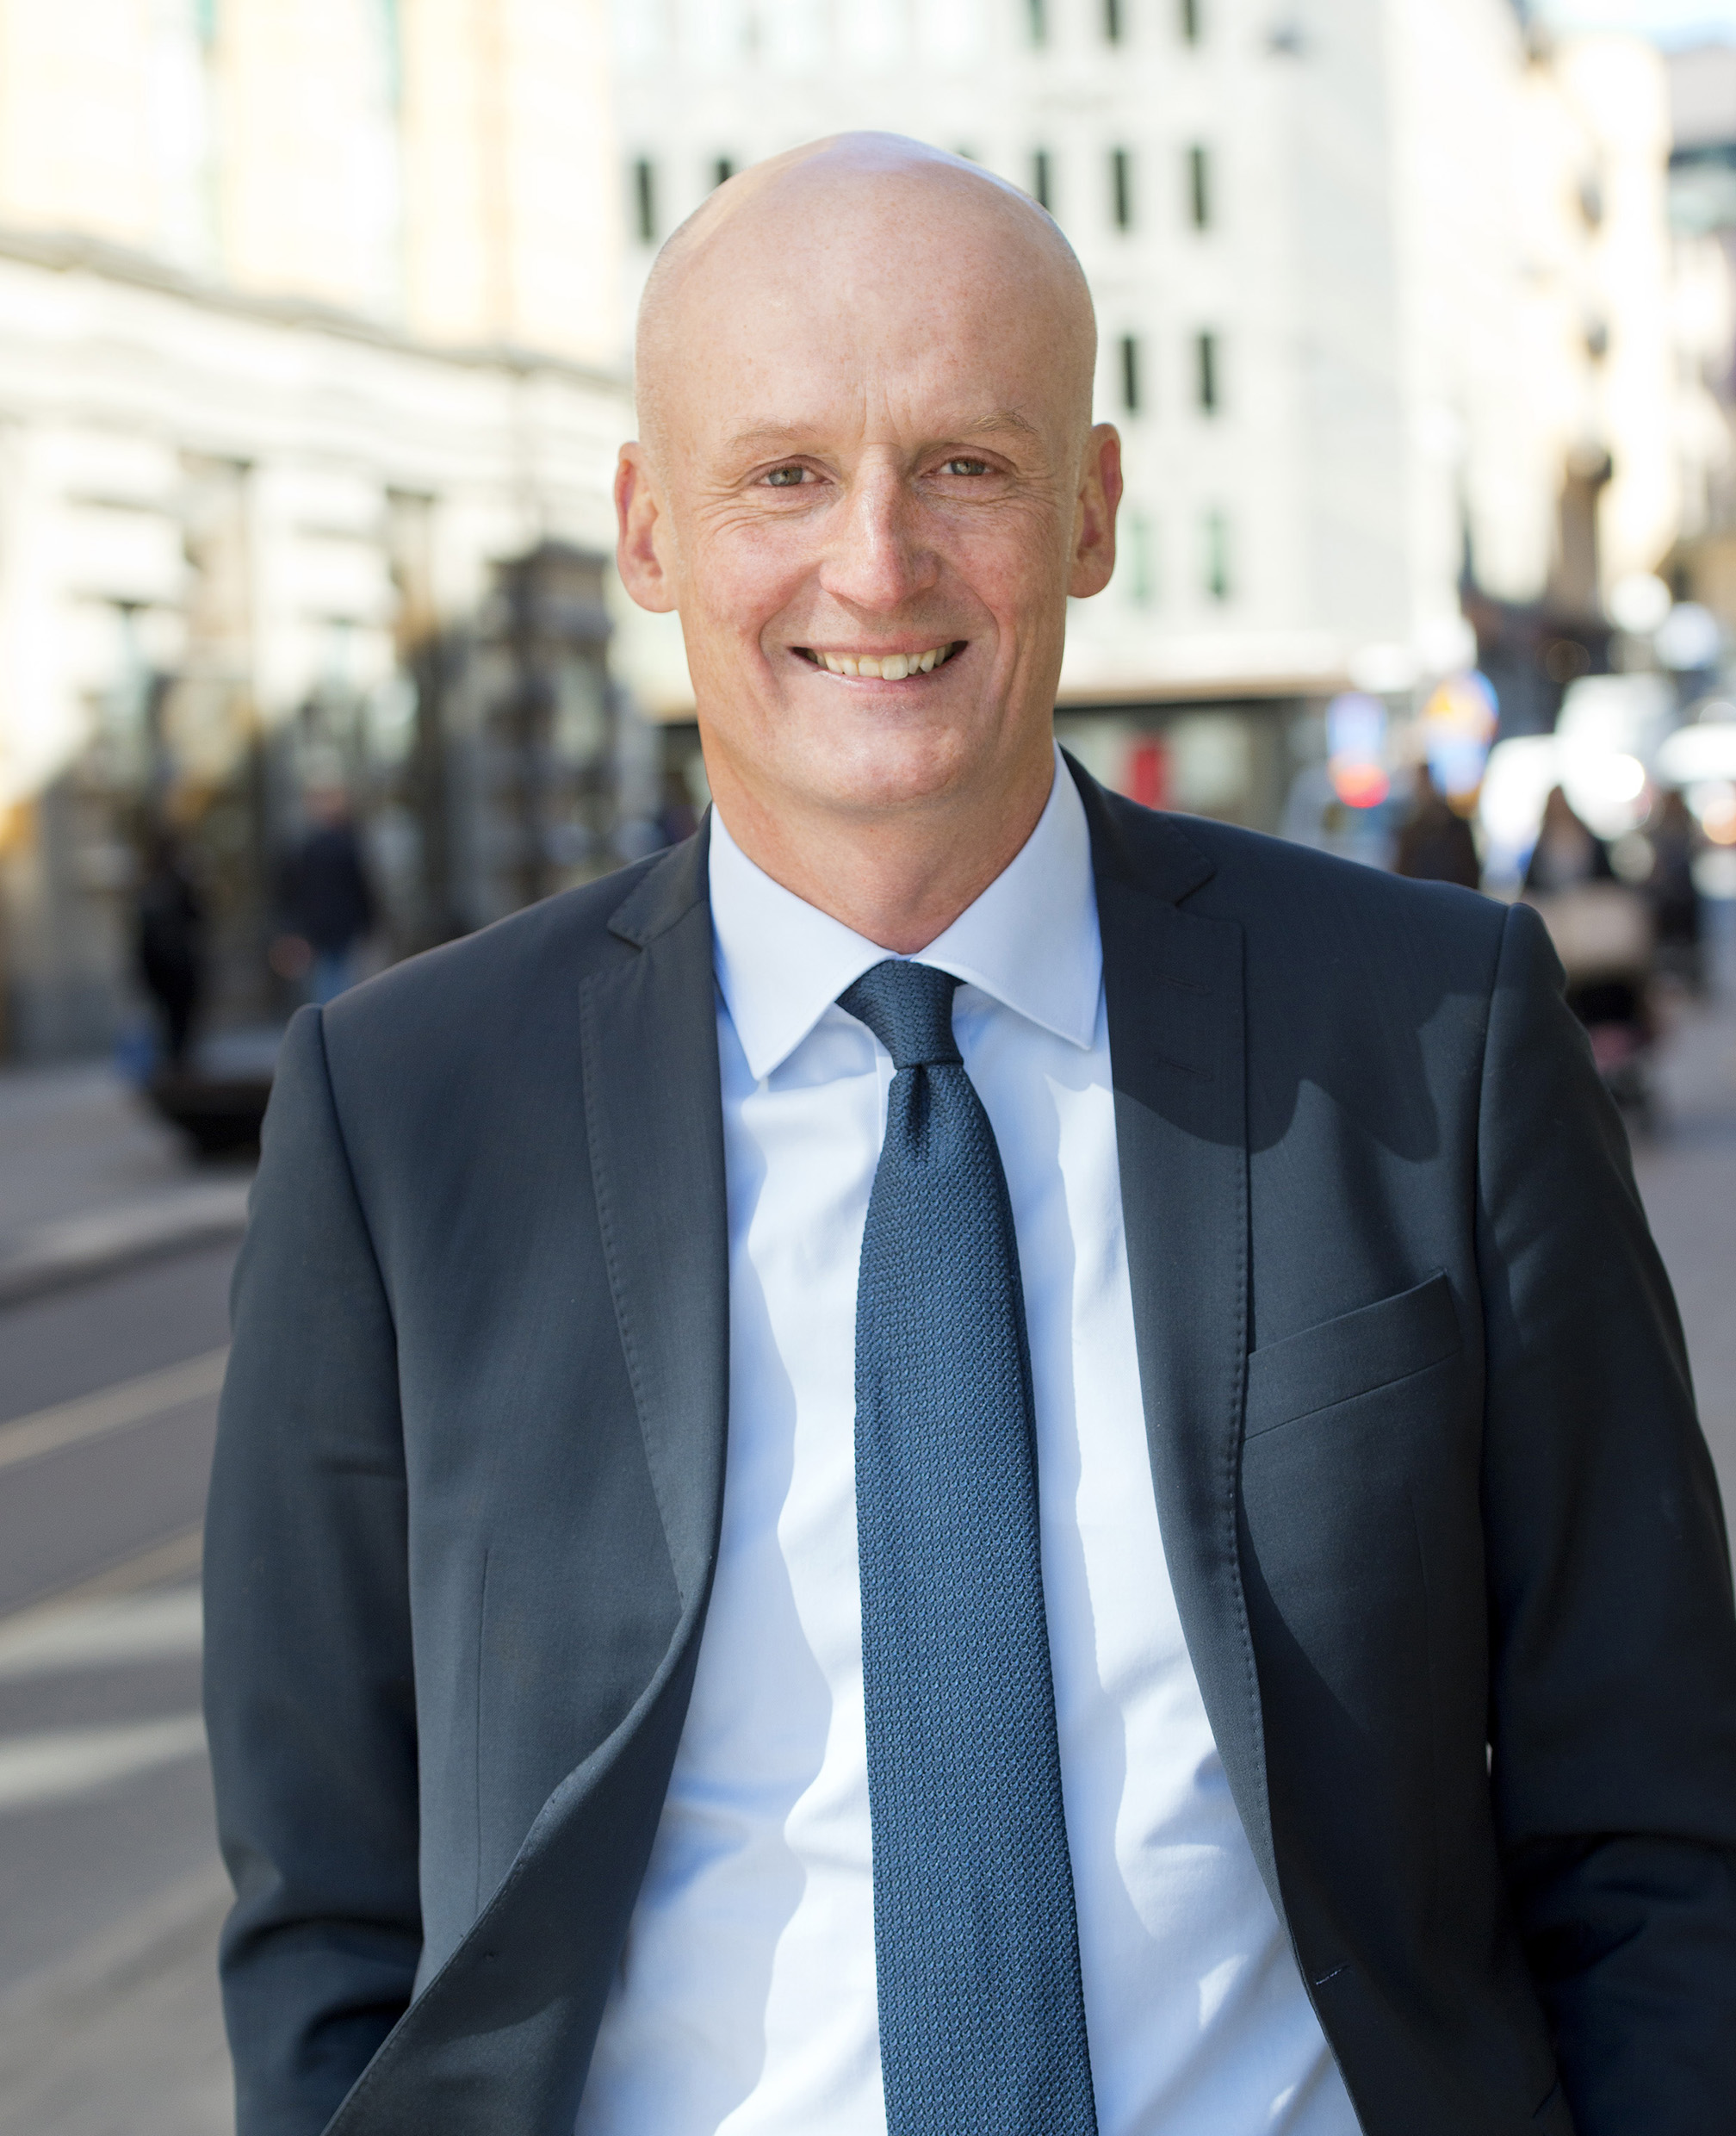 Grant Thornton celebrates key milestones as global CEO Peter Bodin takes office and global revenues pass USD5 billion as network grows to 50,000 people